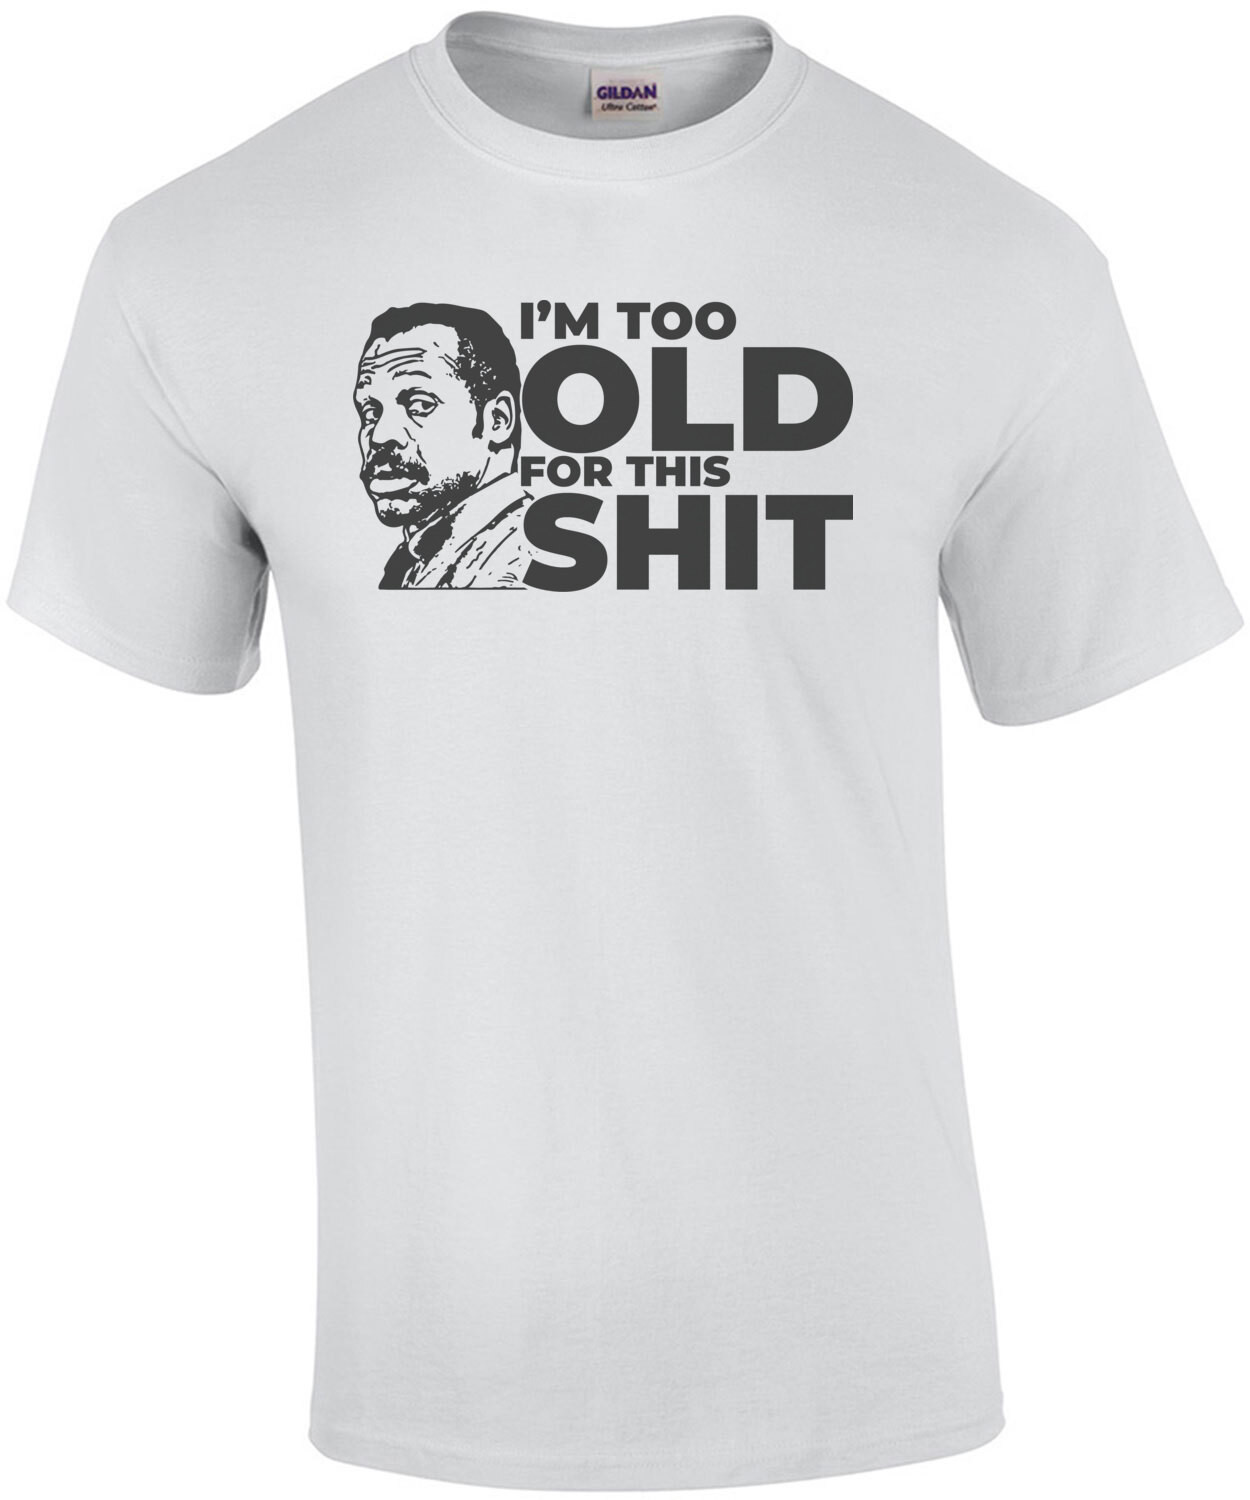 I'm too old for this shit - Danny Glover - Lethal Weapon - 80's T-Shirt